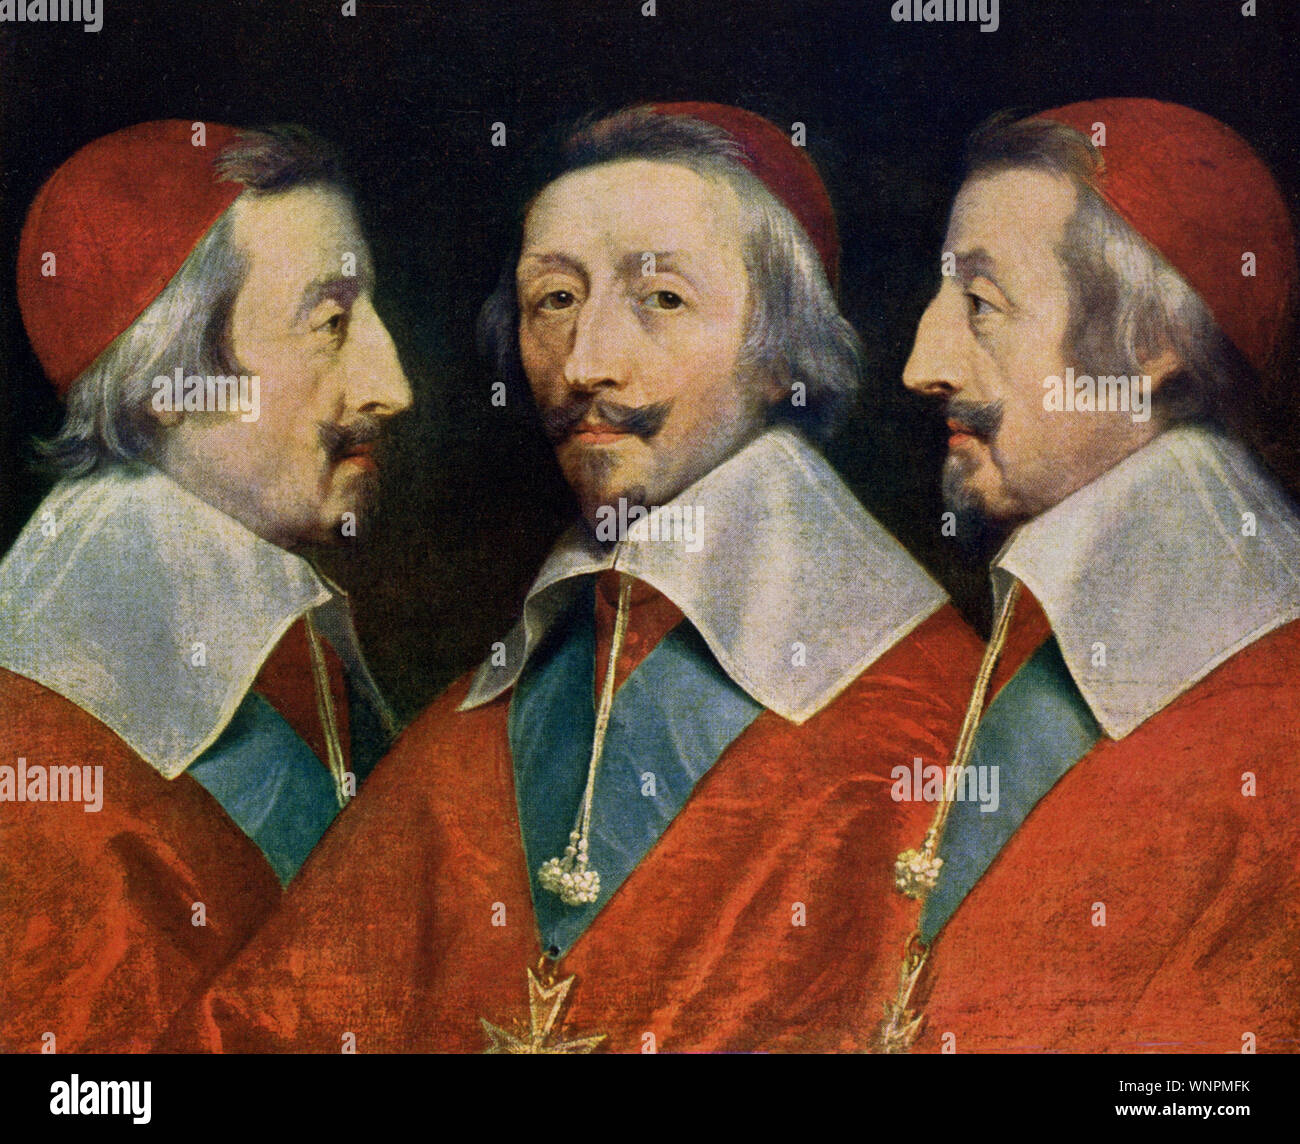 Pictured here is Armand Jean du Plessis (1585-1642), better known as Cardinal von Richelieu. The painting was done in 1642  by Philippe de Champaigne (1602-1674) and is housed in the London National Gallery. Richelieu was a French clergyman and statesman. He was consecrated as a bishop in 1607 and was appointed Foreign Secretary in 1616.  He became a cardinal in 1622, and King Louis XIII's chief minister in 1624. He remained in office until his death in 1642 Stock Photo